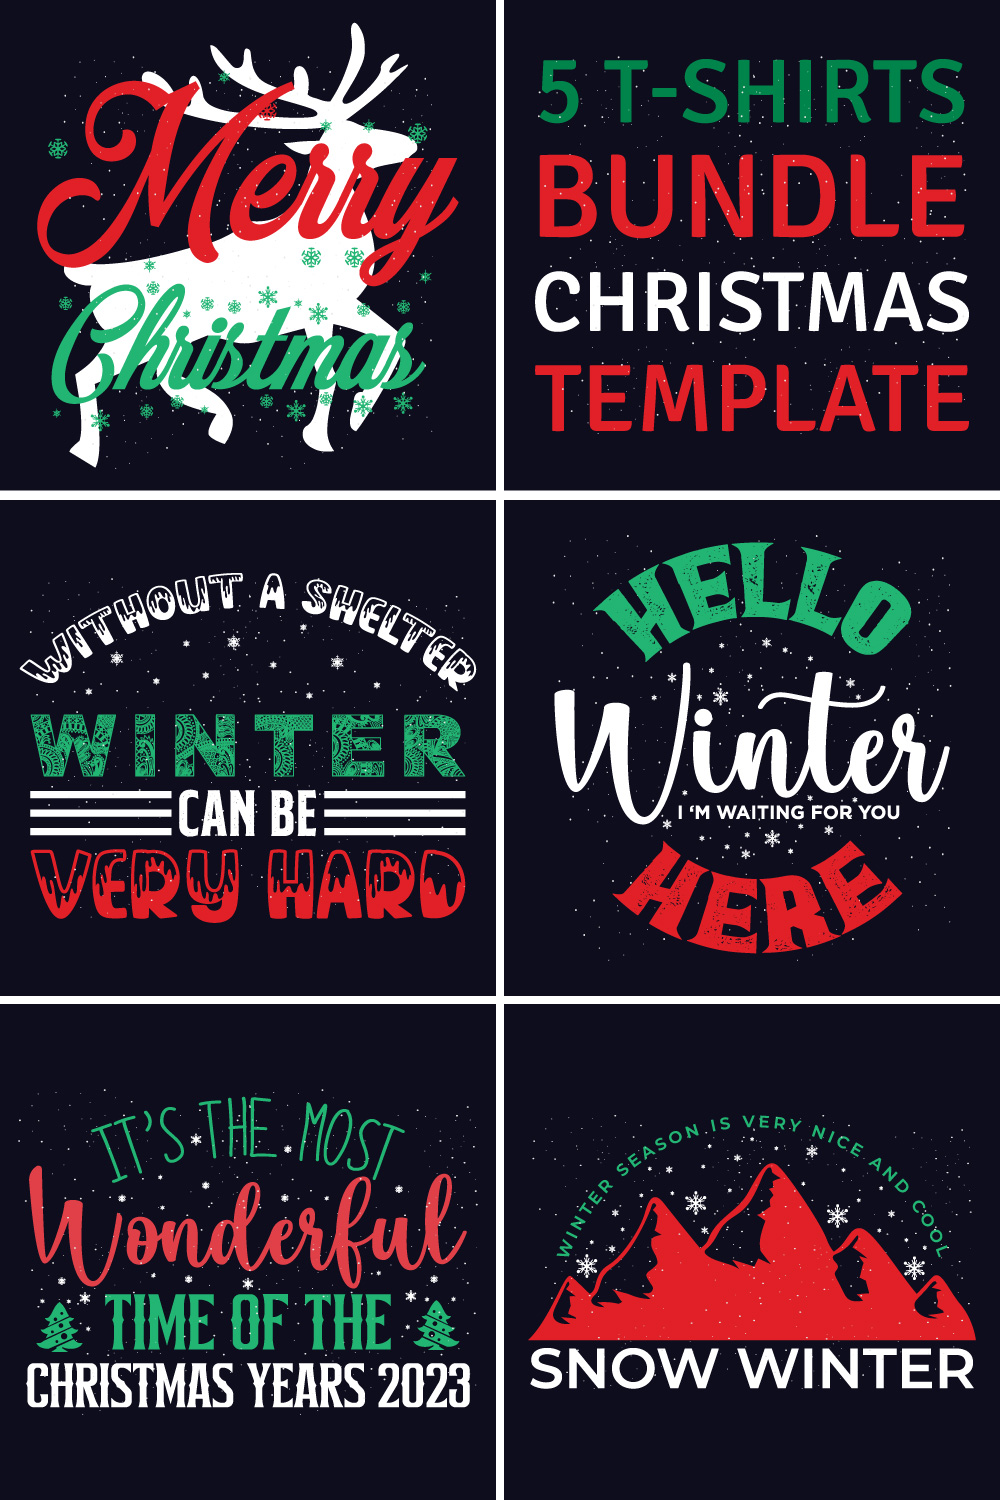 A set of irresistible images for prints on the Christmas theme.